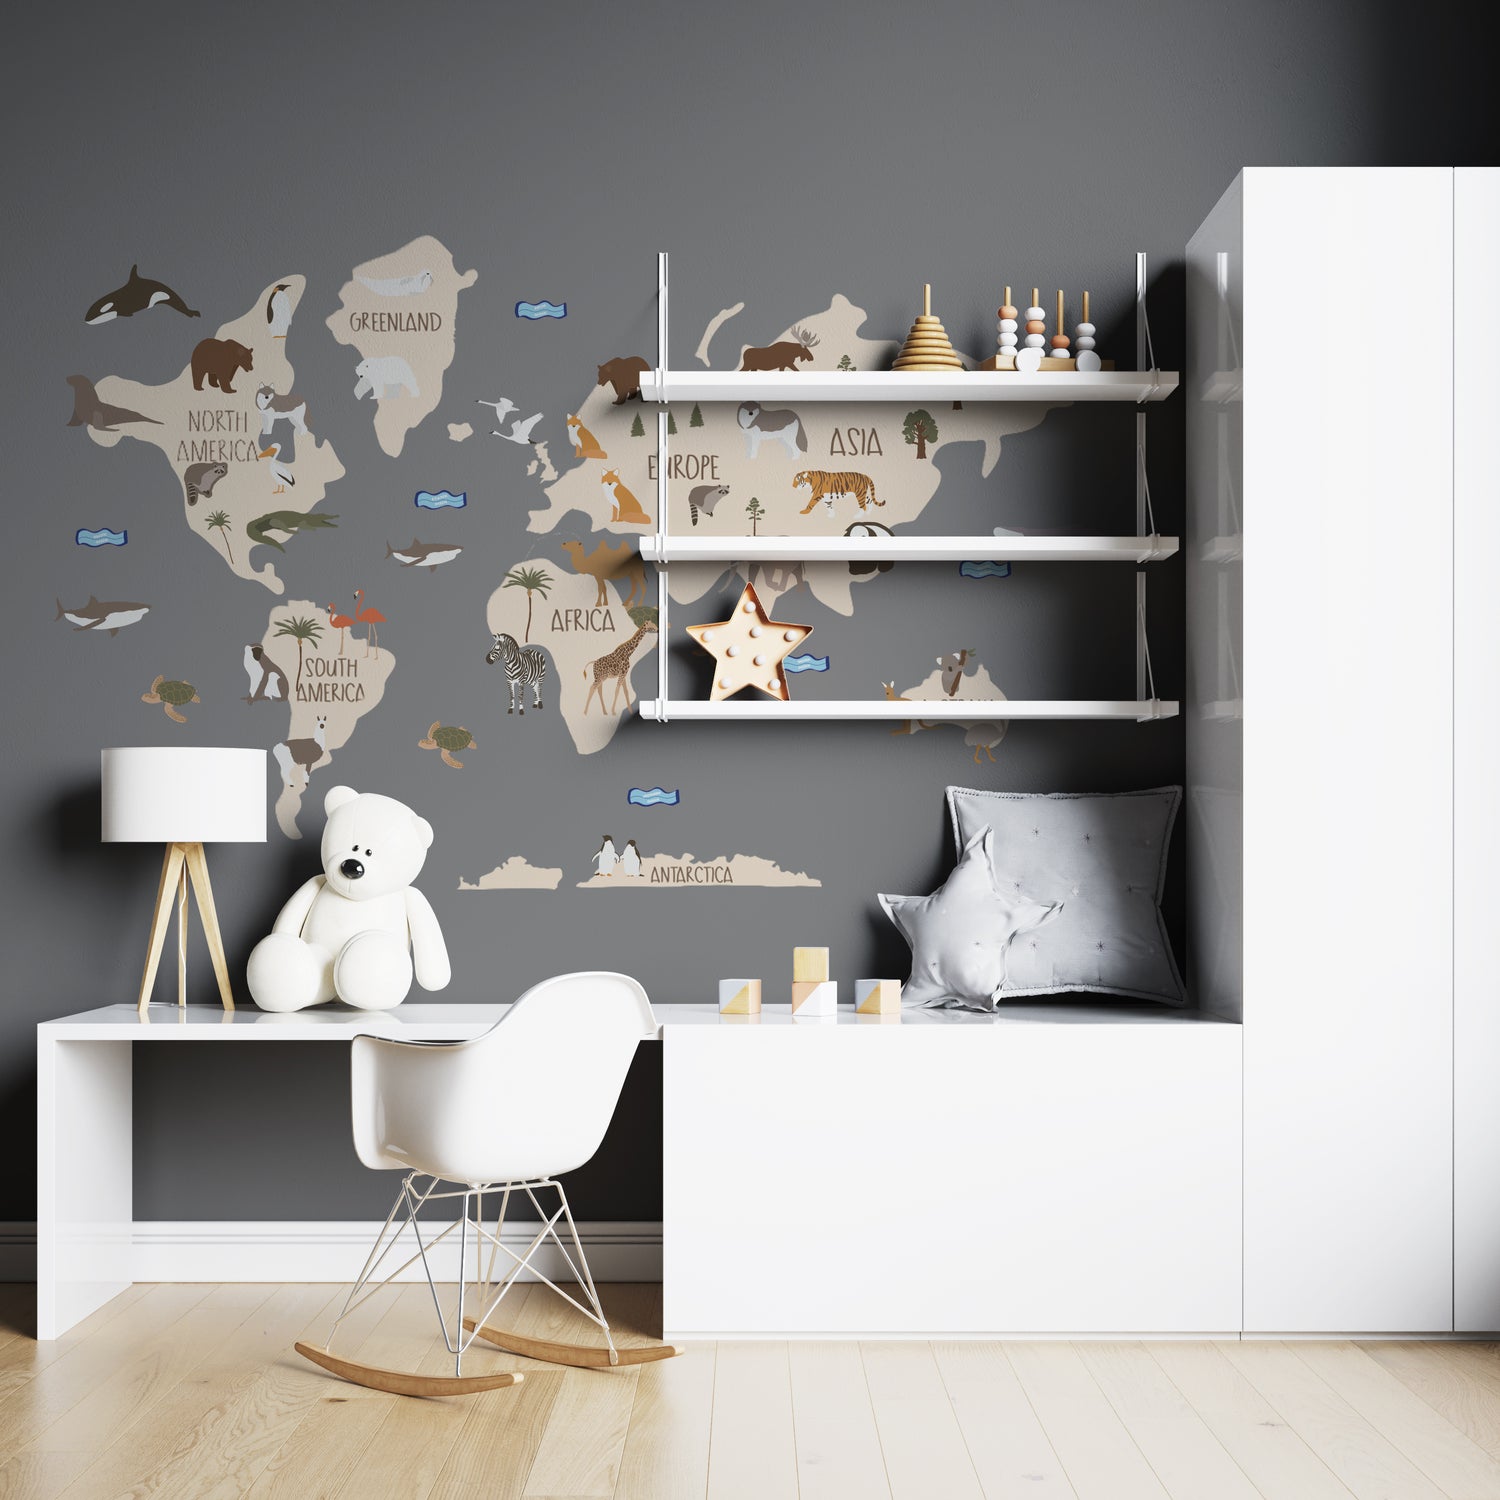 Build Your Own World Map Wall Sticker L